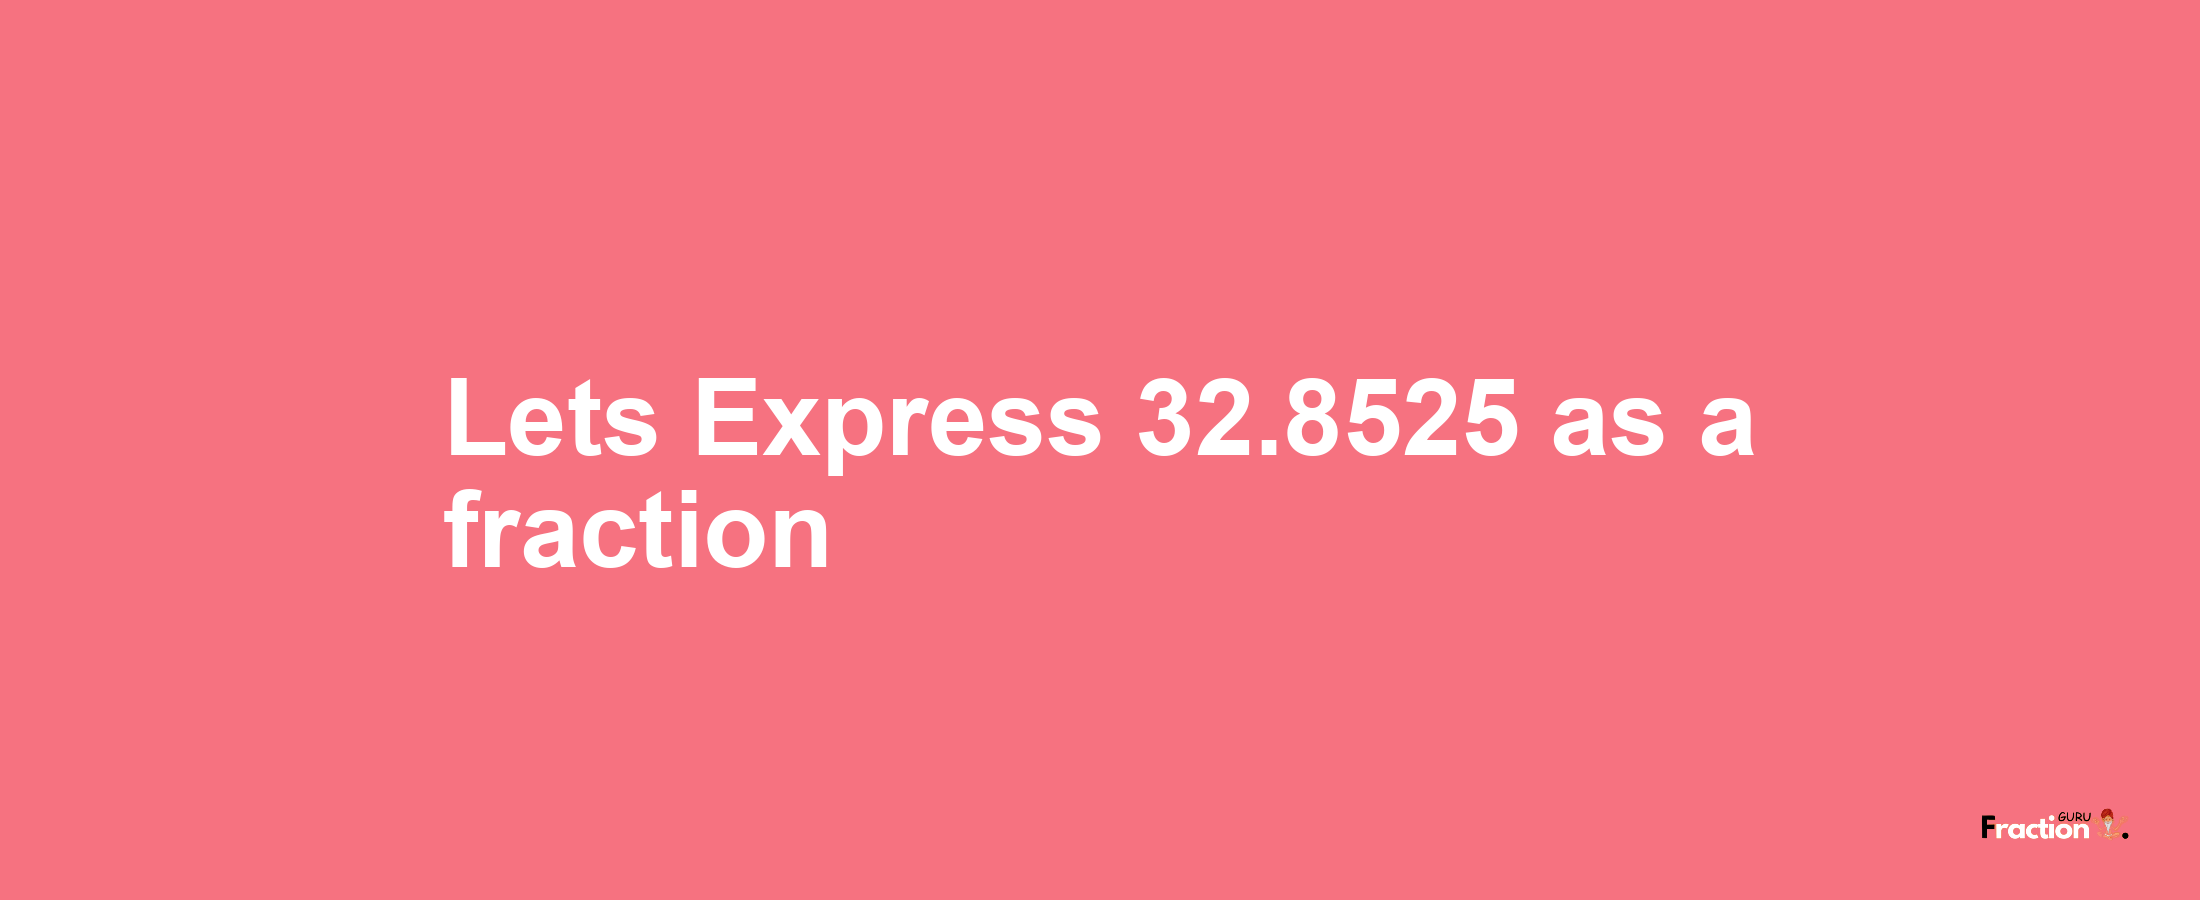 Lets Express 32.8525 as afraction